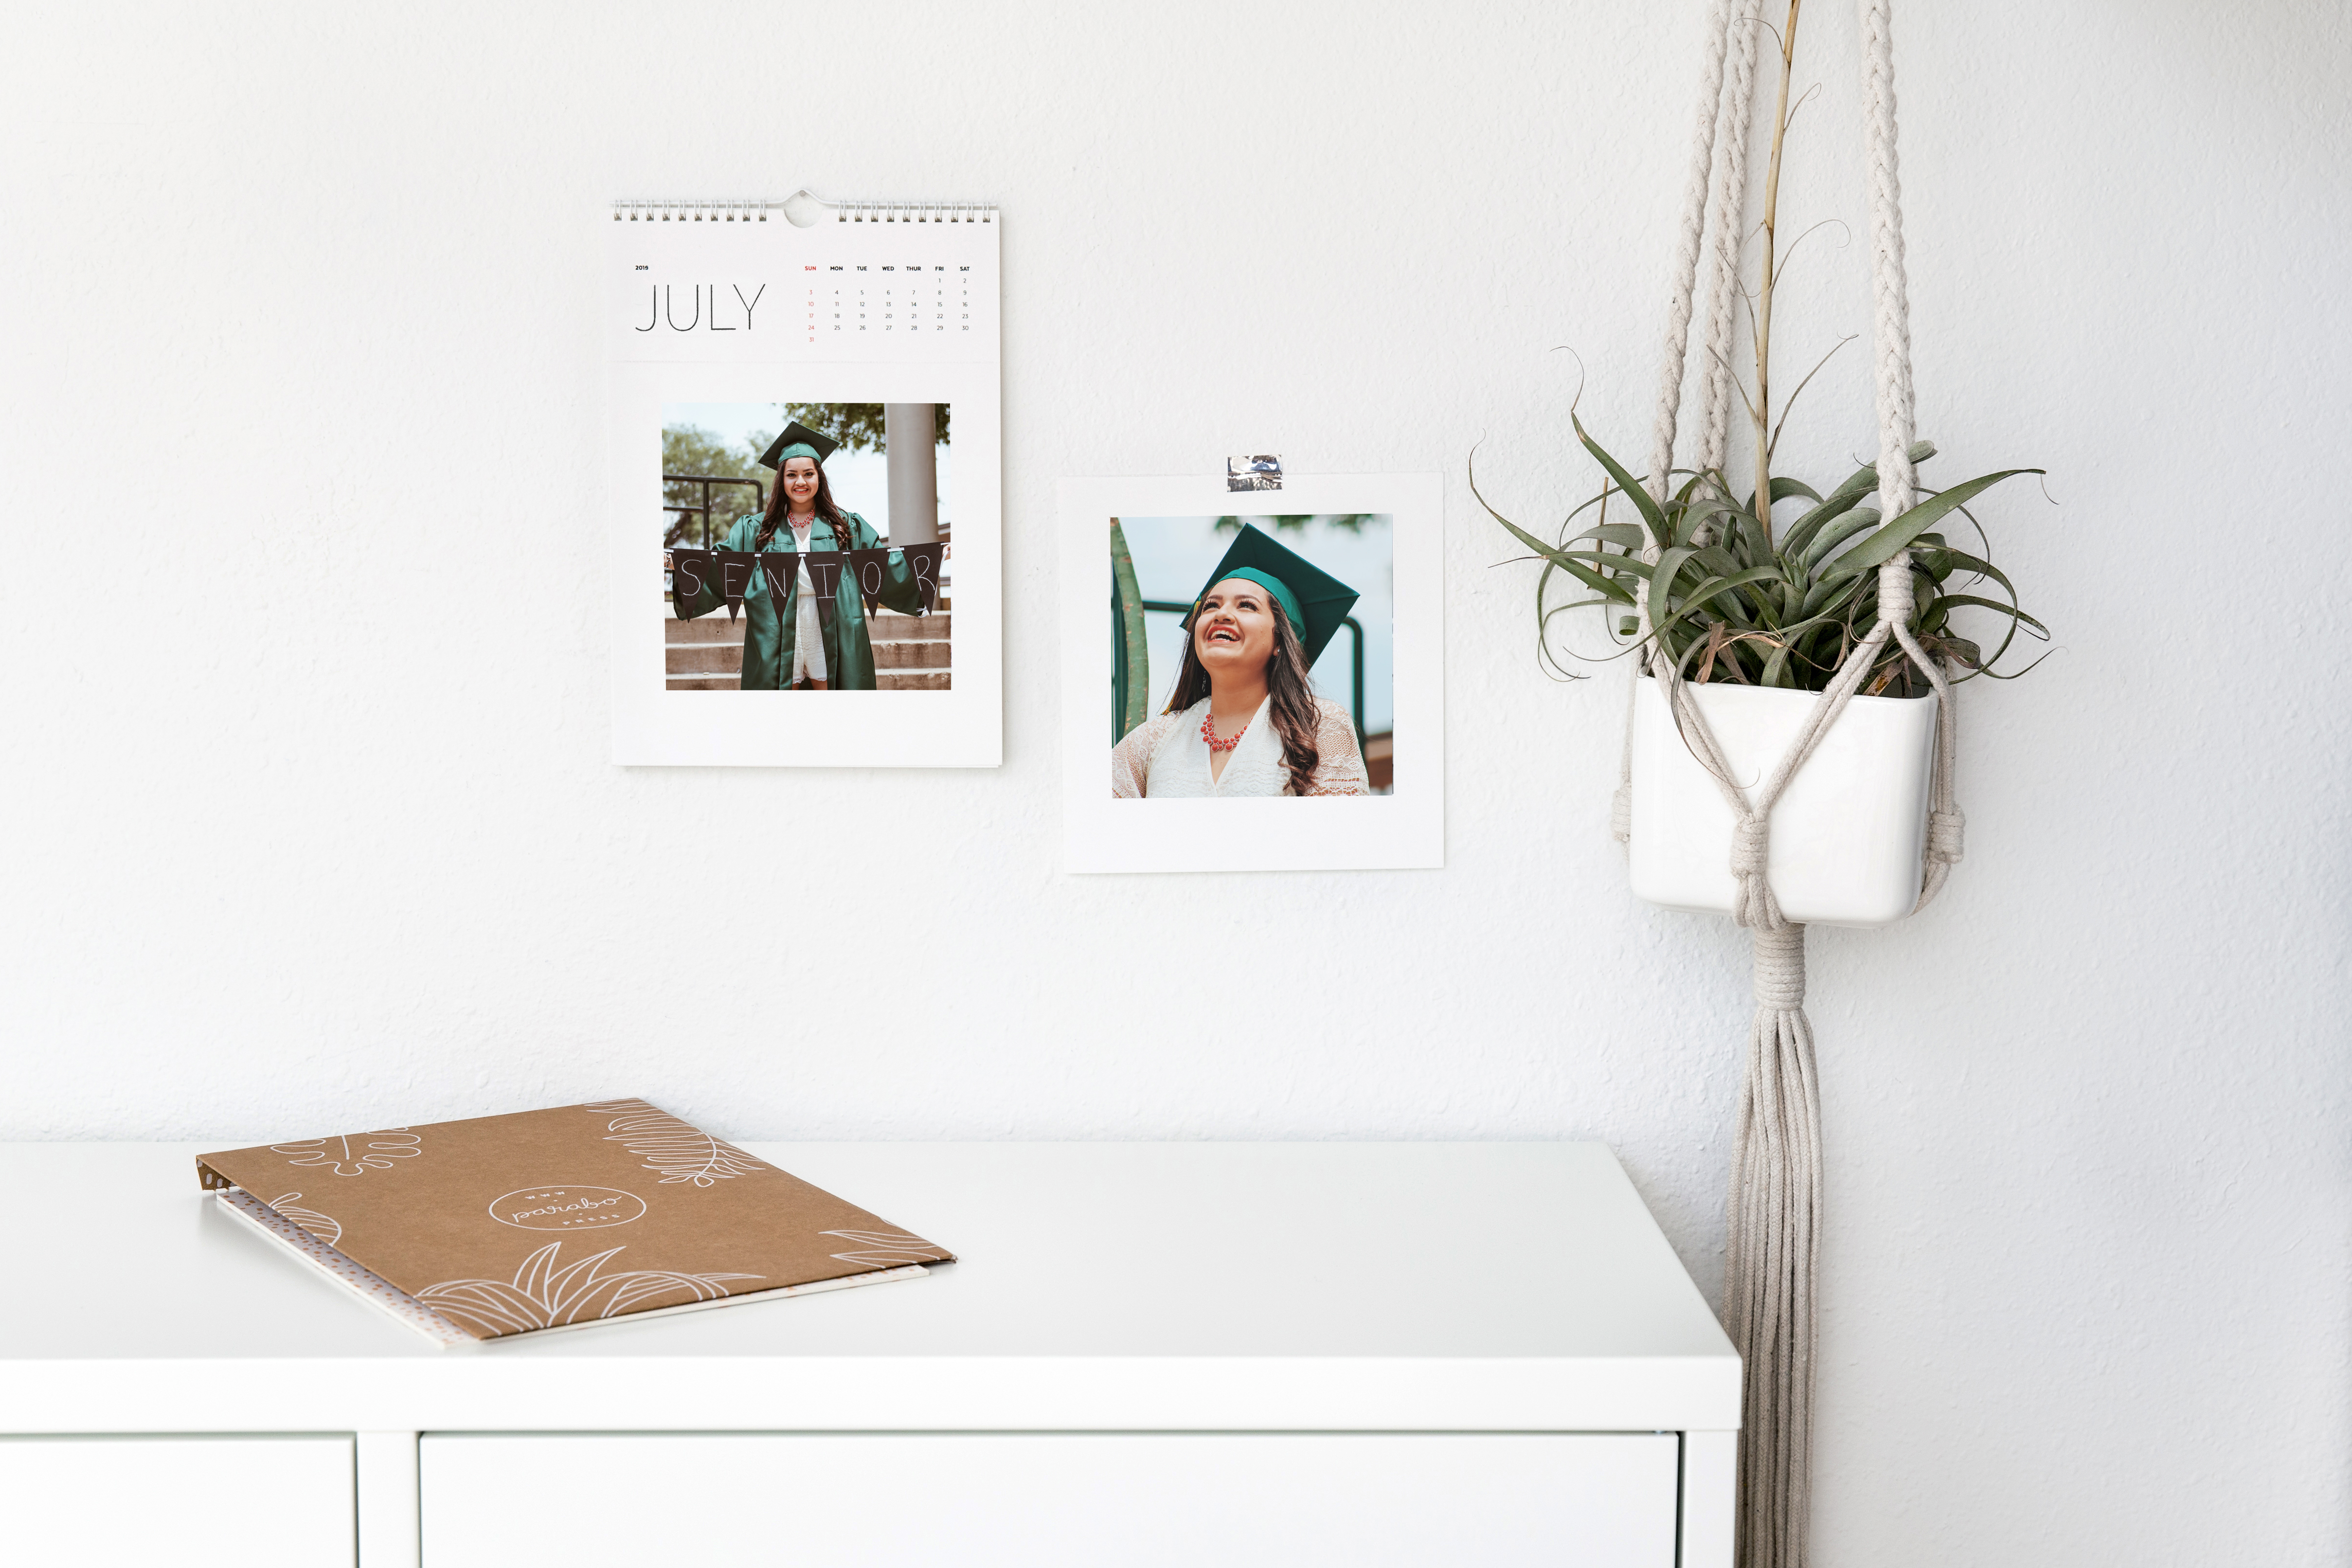 Thoughtful Photo Gifts for Grads